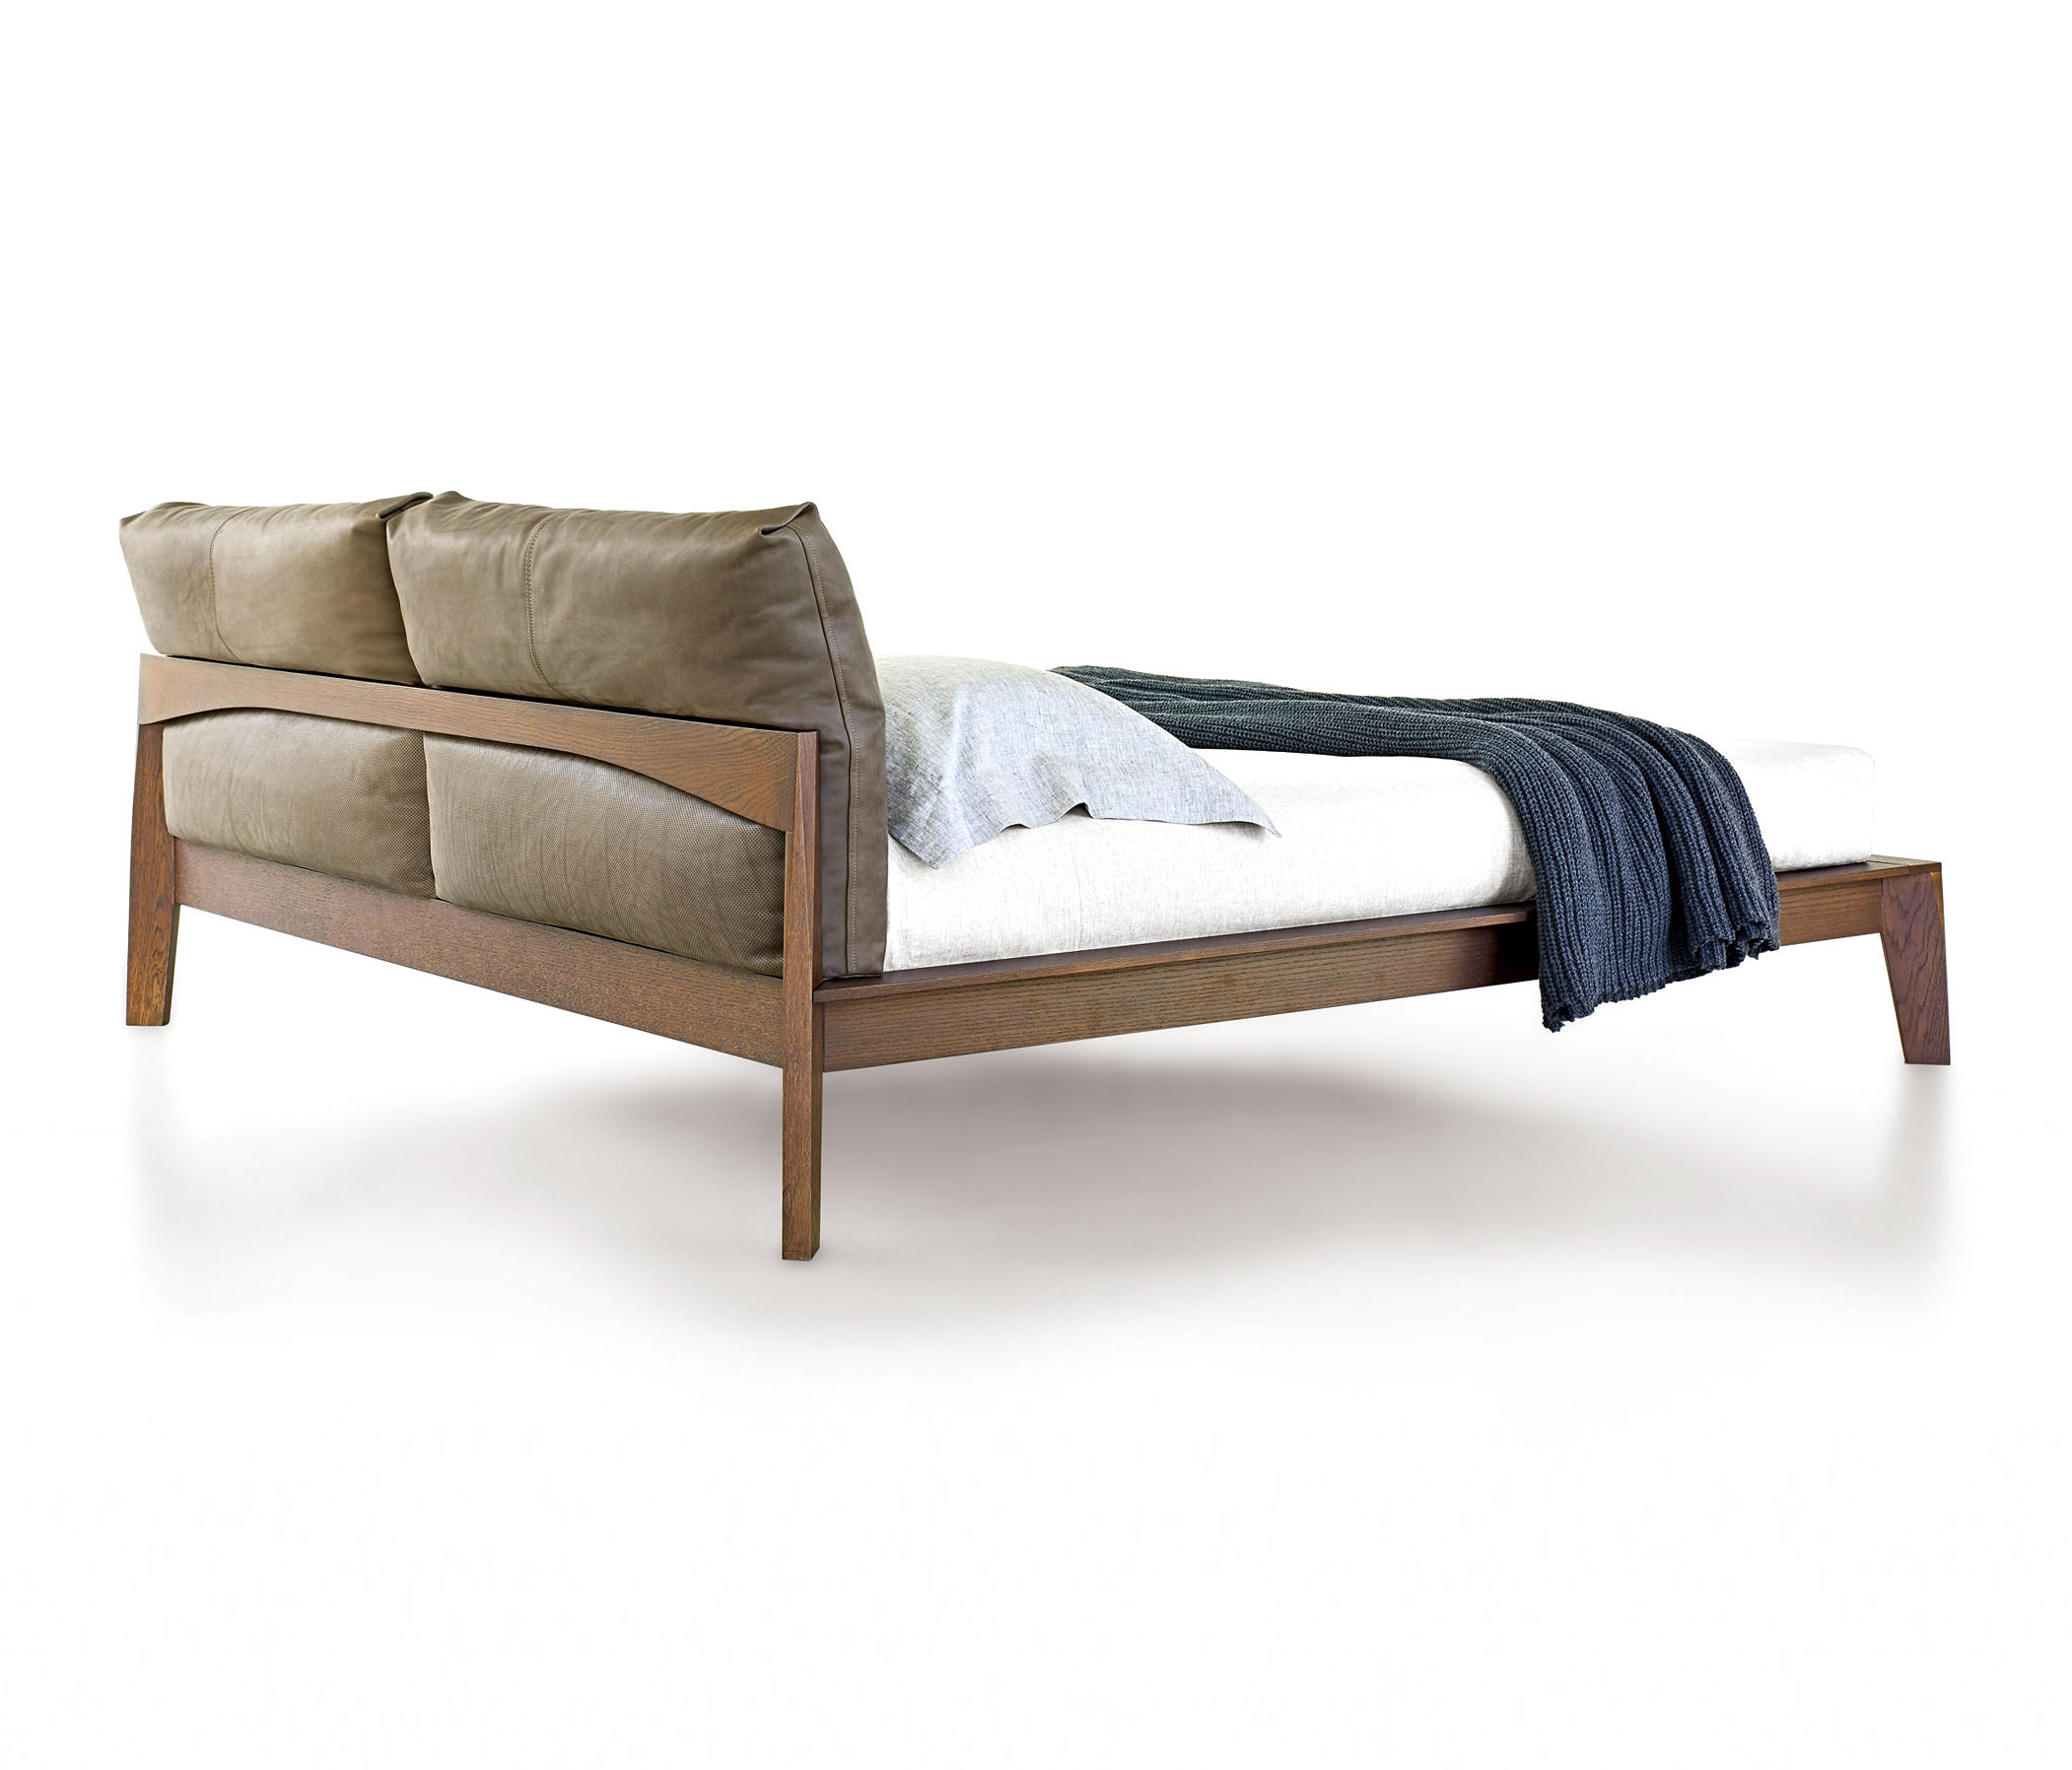 WISH - Beds from Molteni & C | Architonic